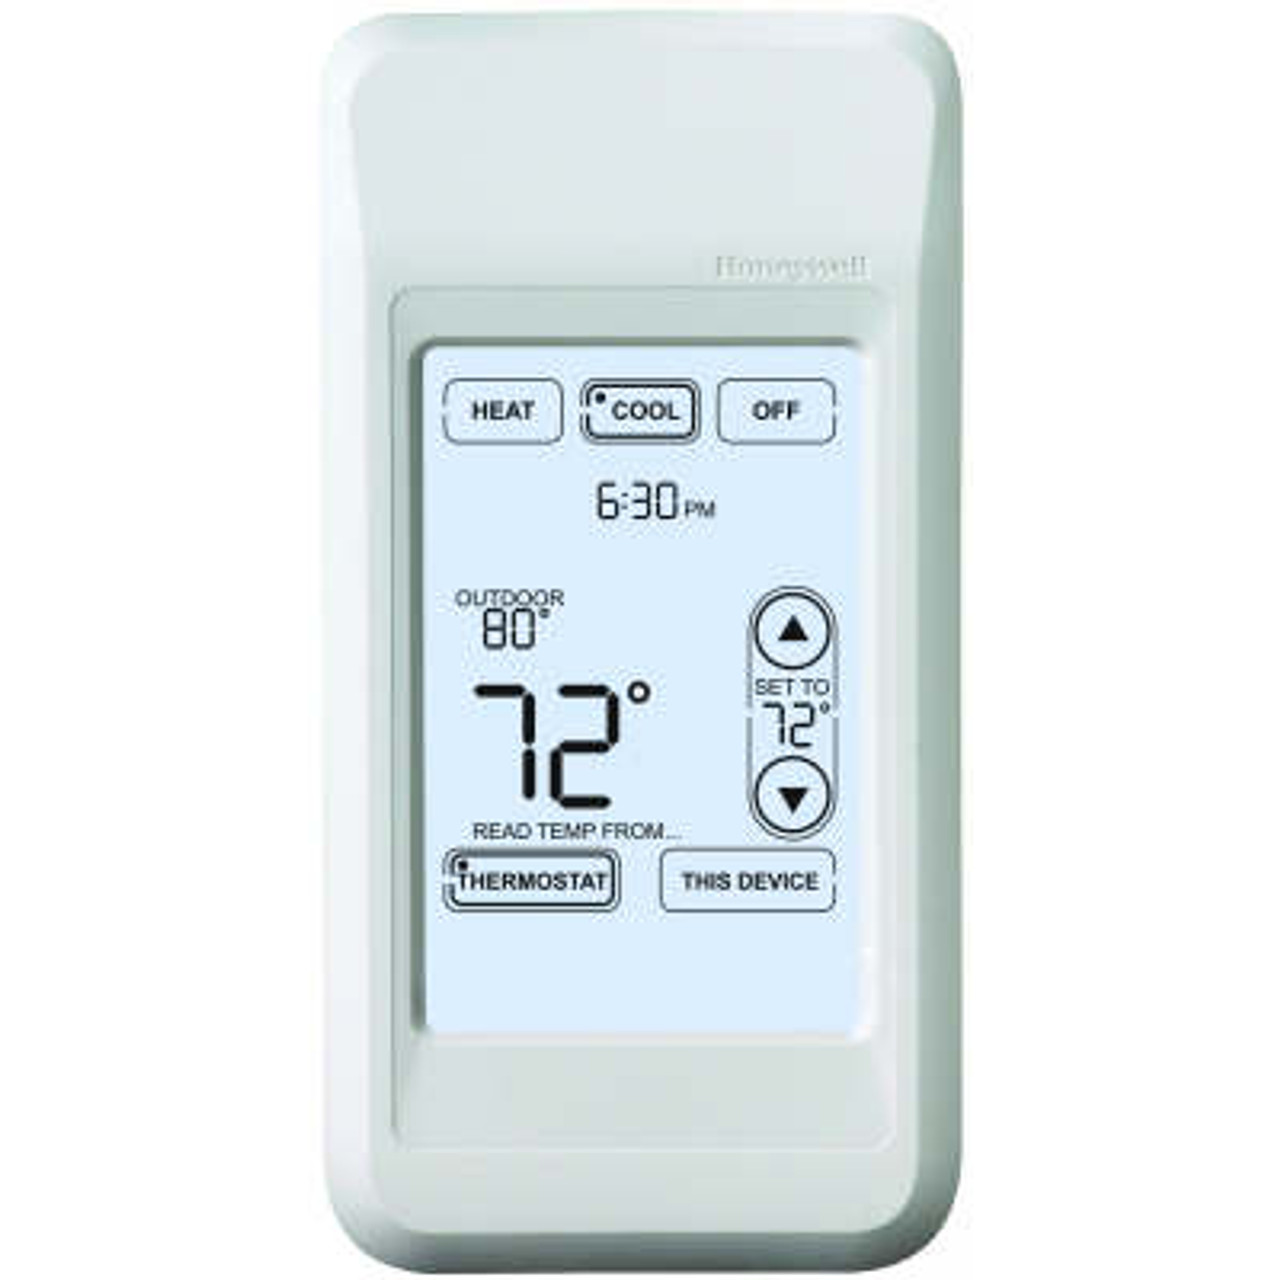 Honeywell REM5000R1001 Portable Comfort Control For Redlink Thermostats